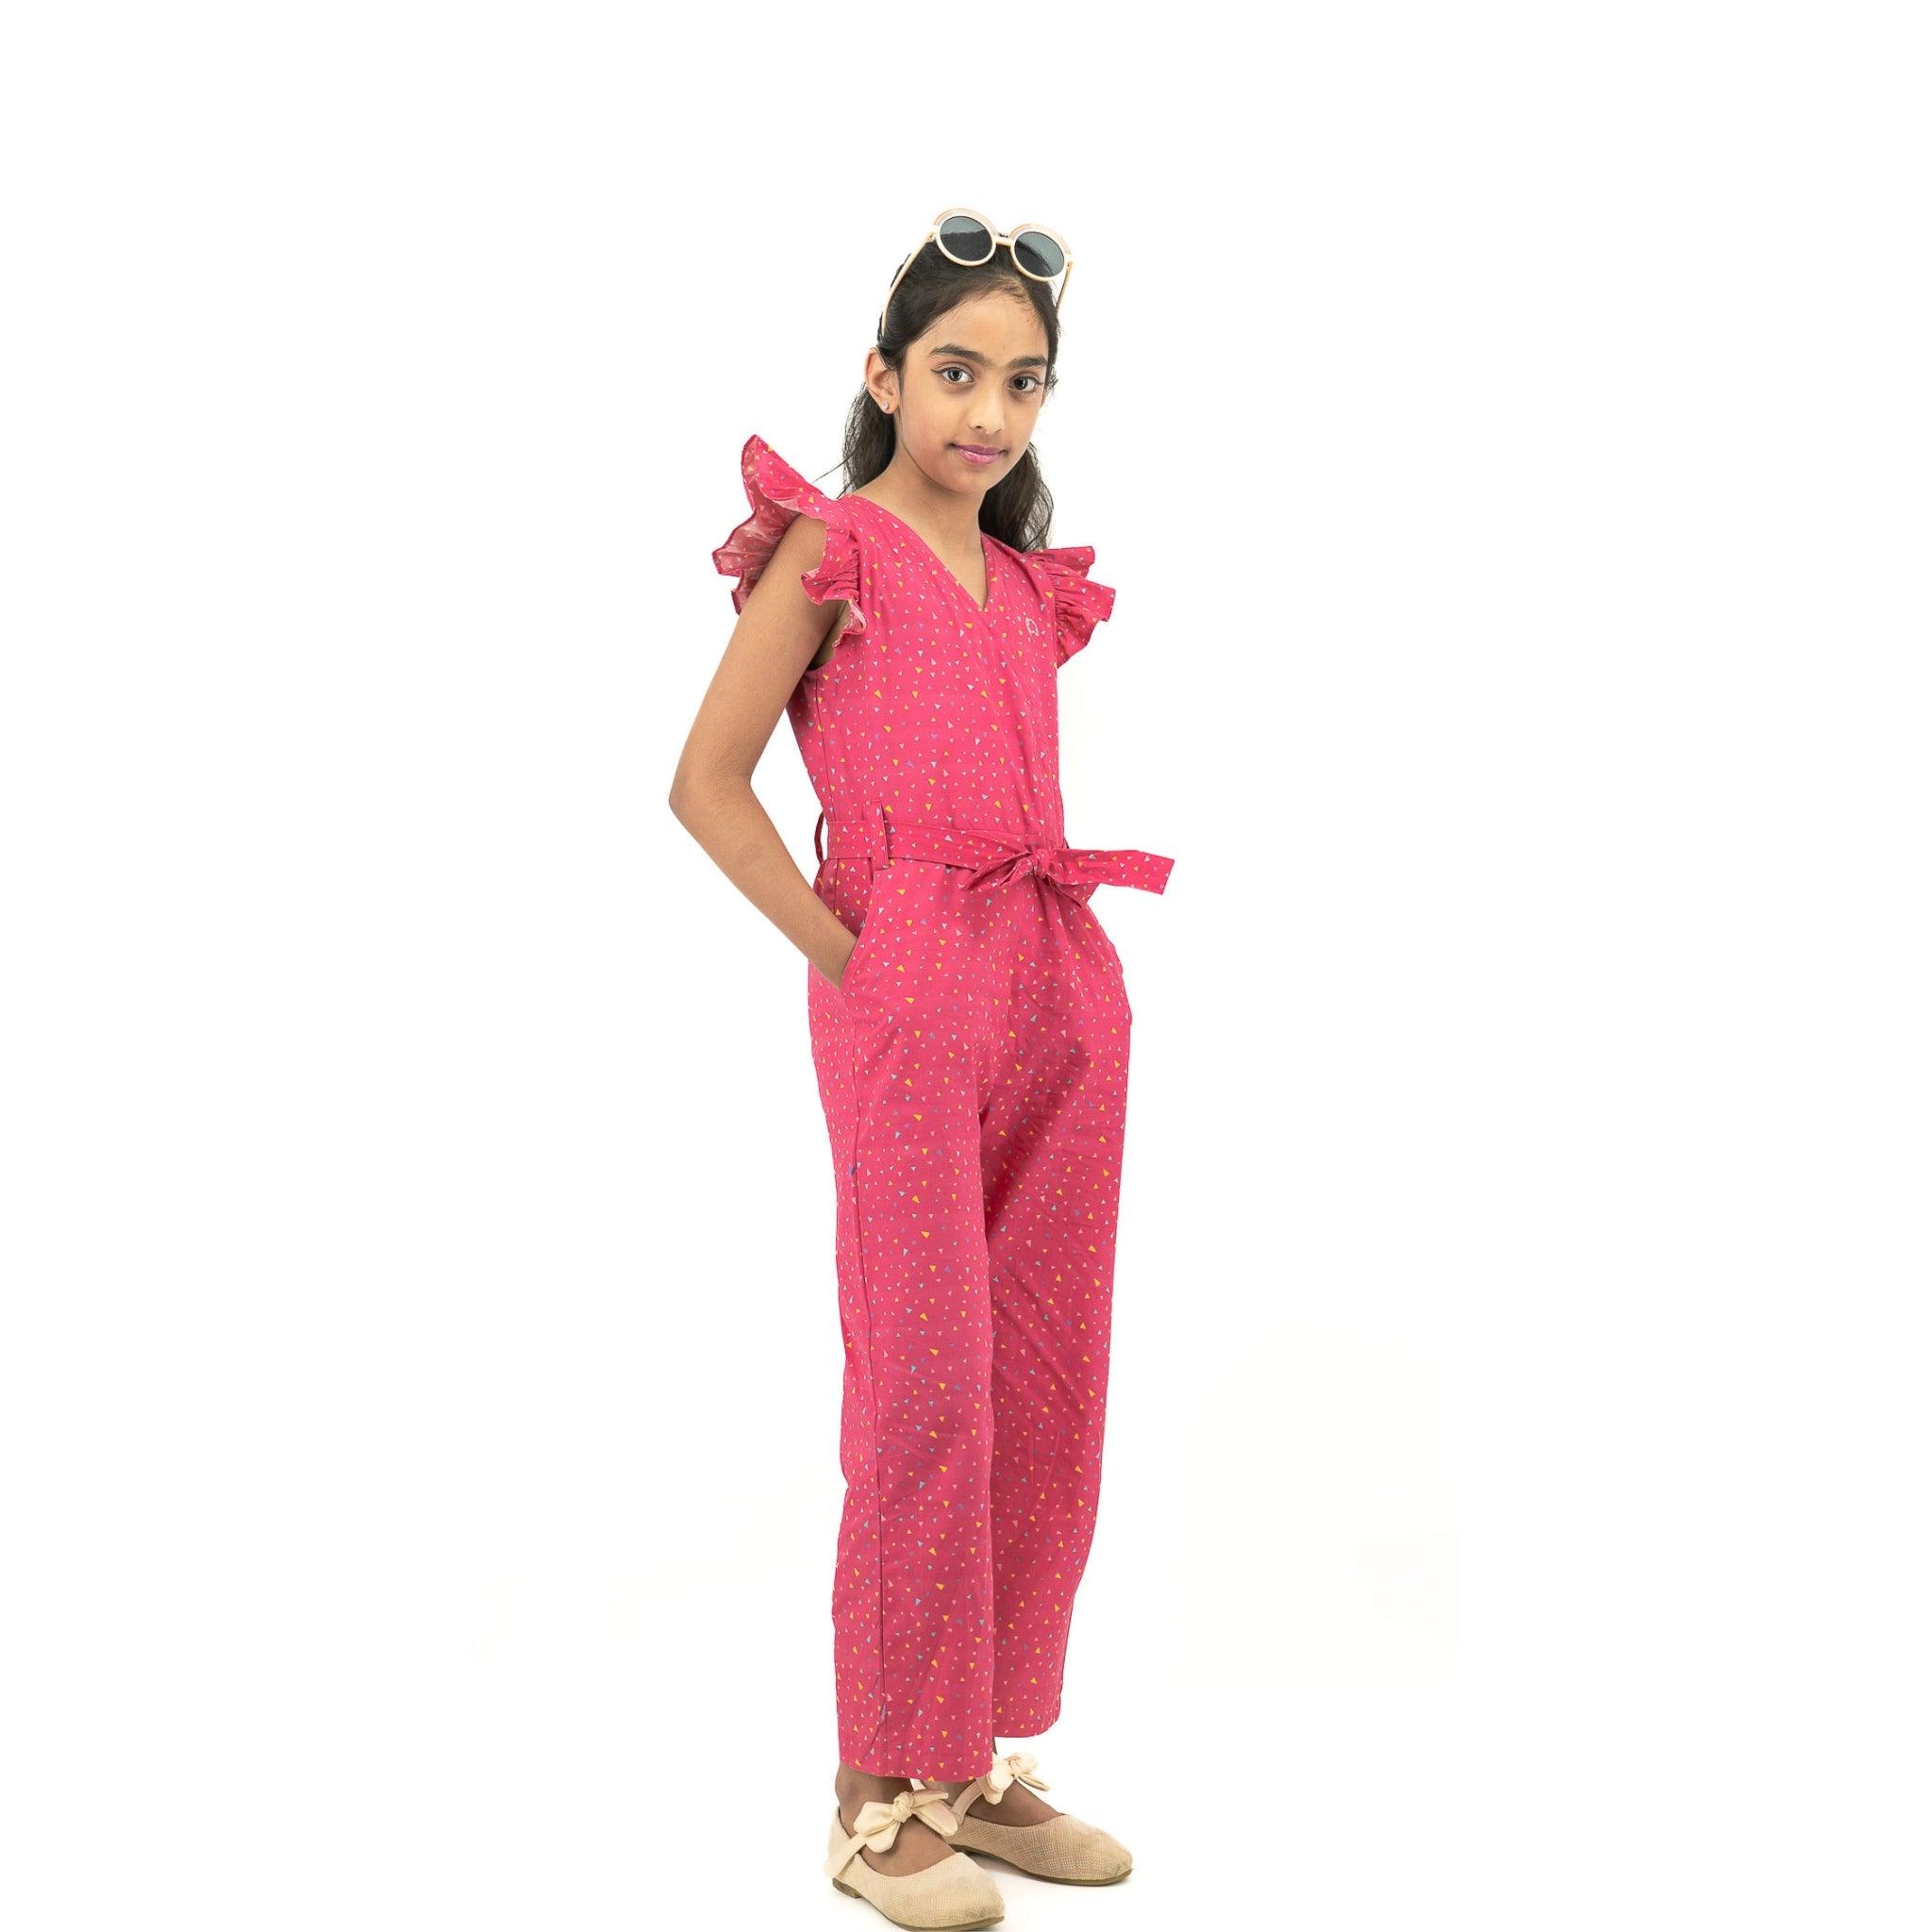 Young girl posing confidently in a Red Rose cotton jumpsuit for girls with a belt, hands on hips, wearing white sunglasses on her head, against a white background.